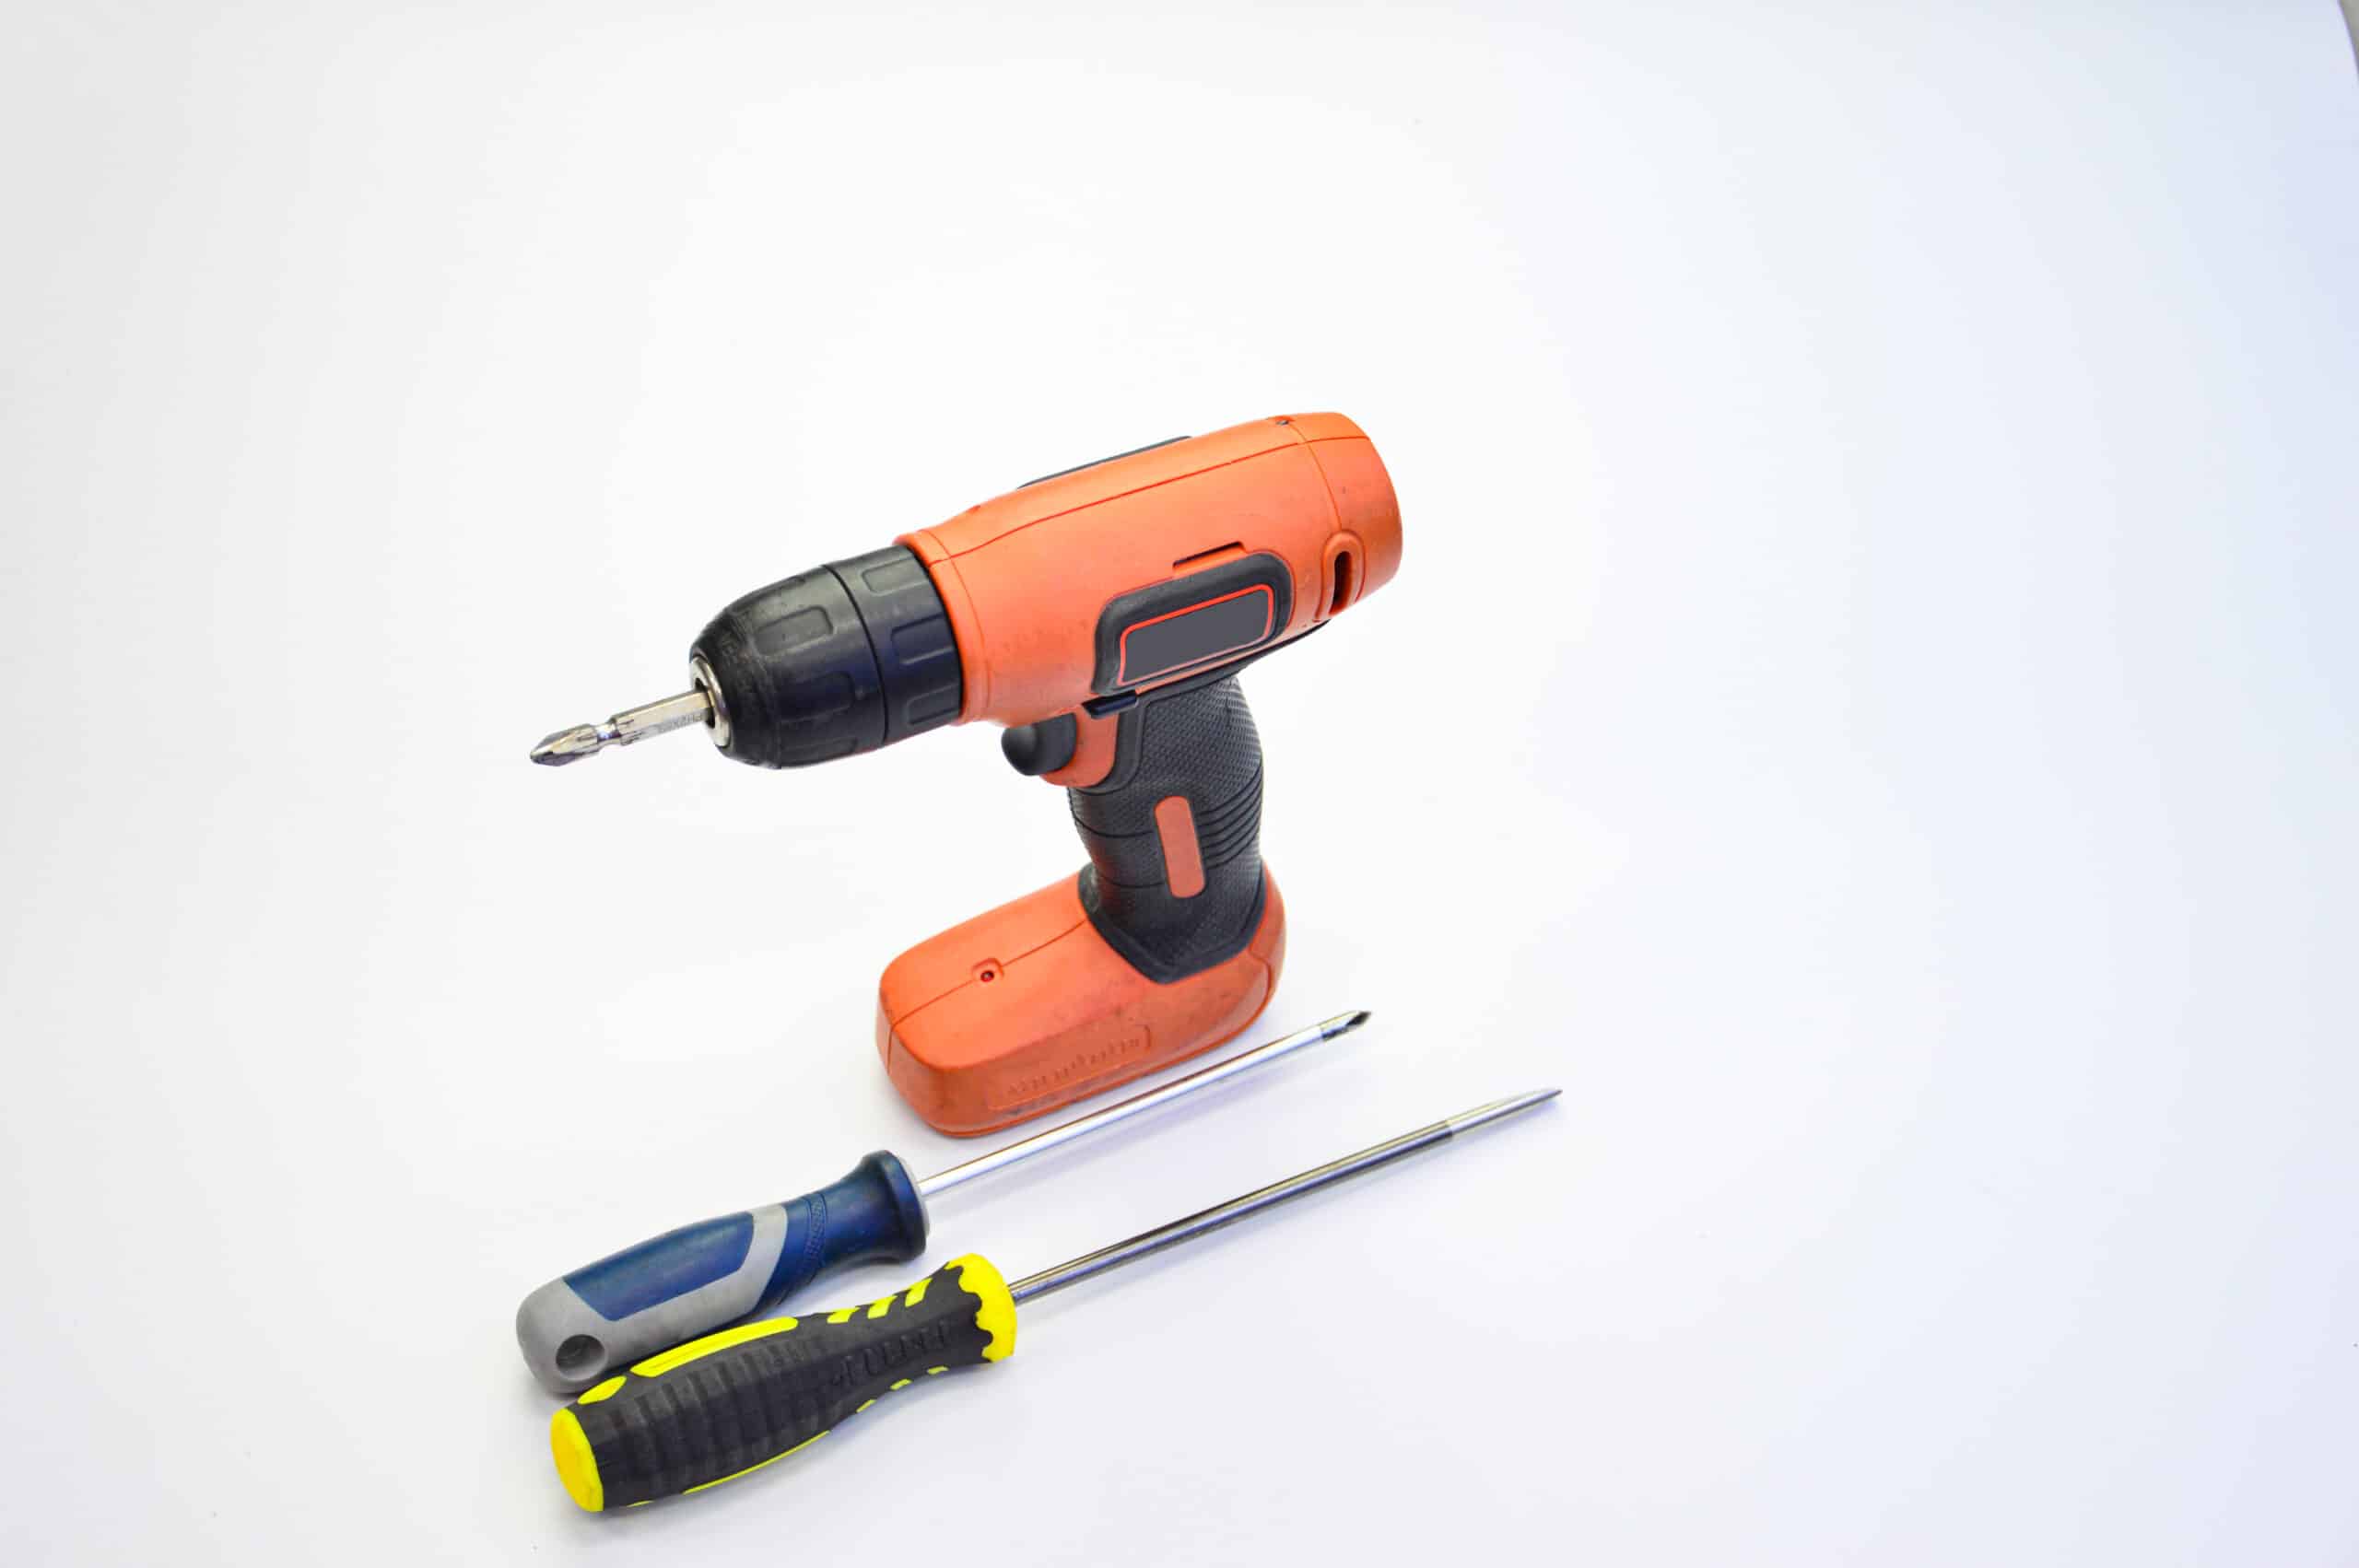 theprecisiontools.com : Why would you use a cordless drill instead of standard corded drill?